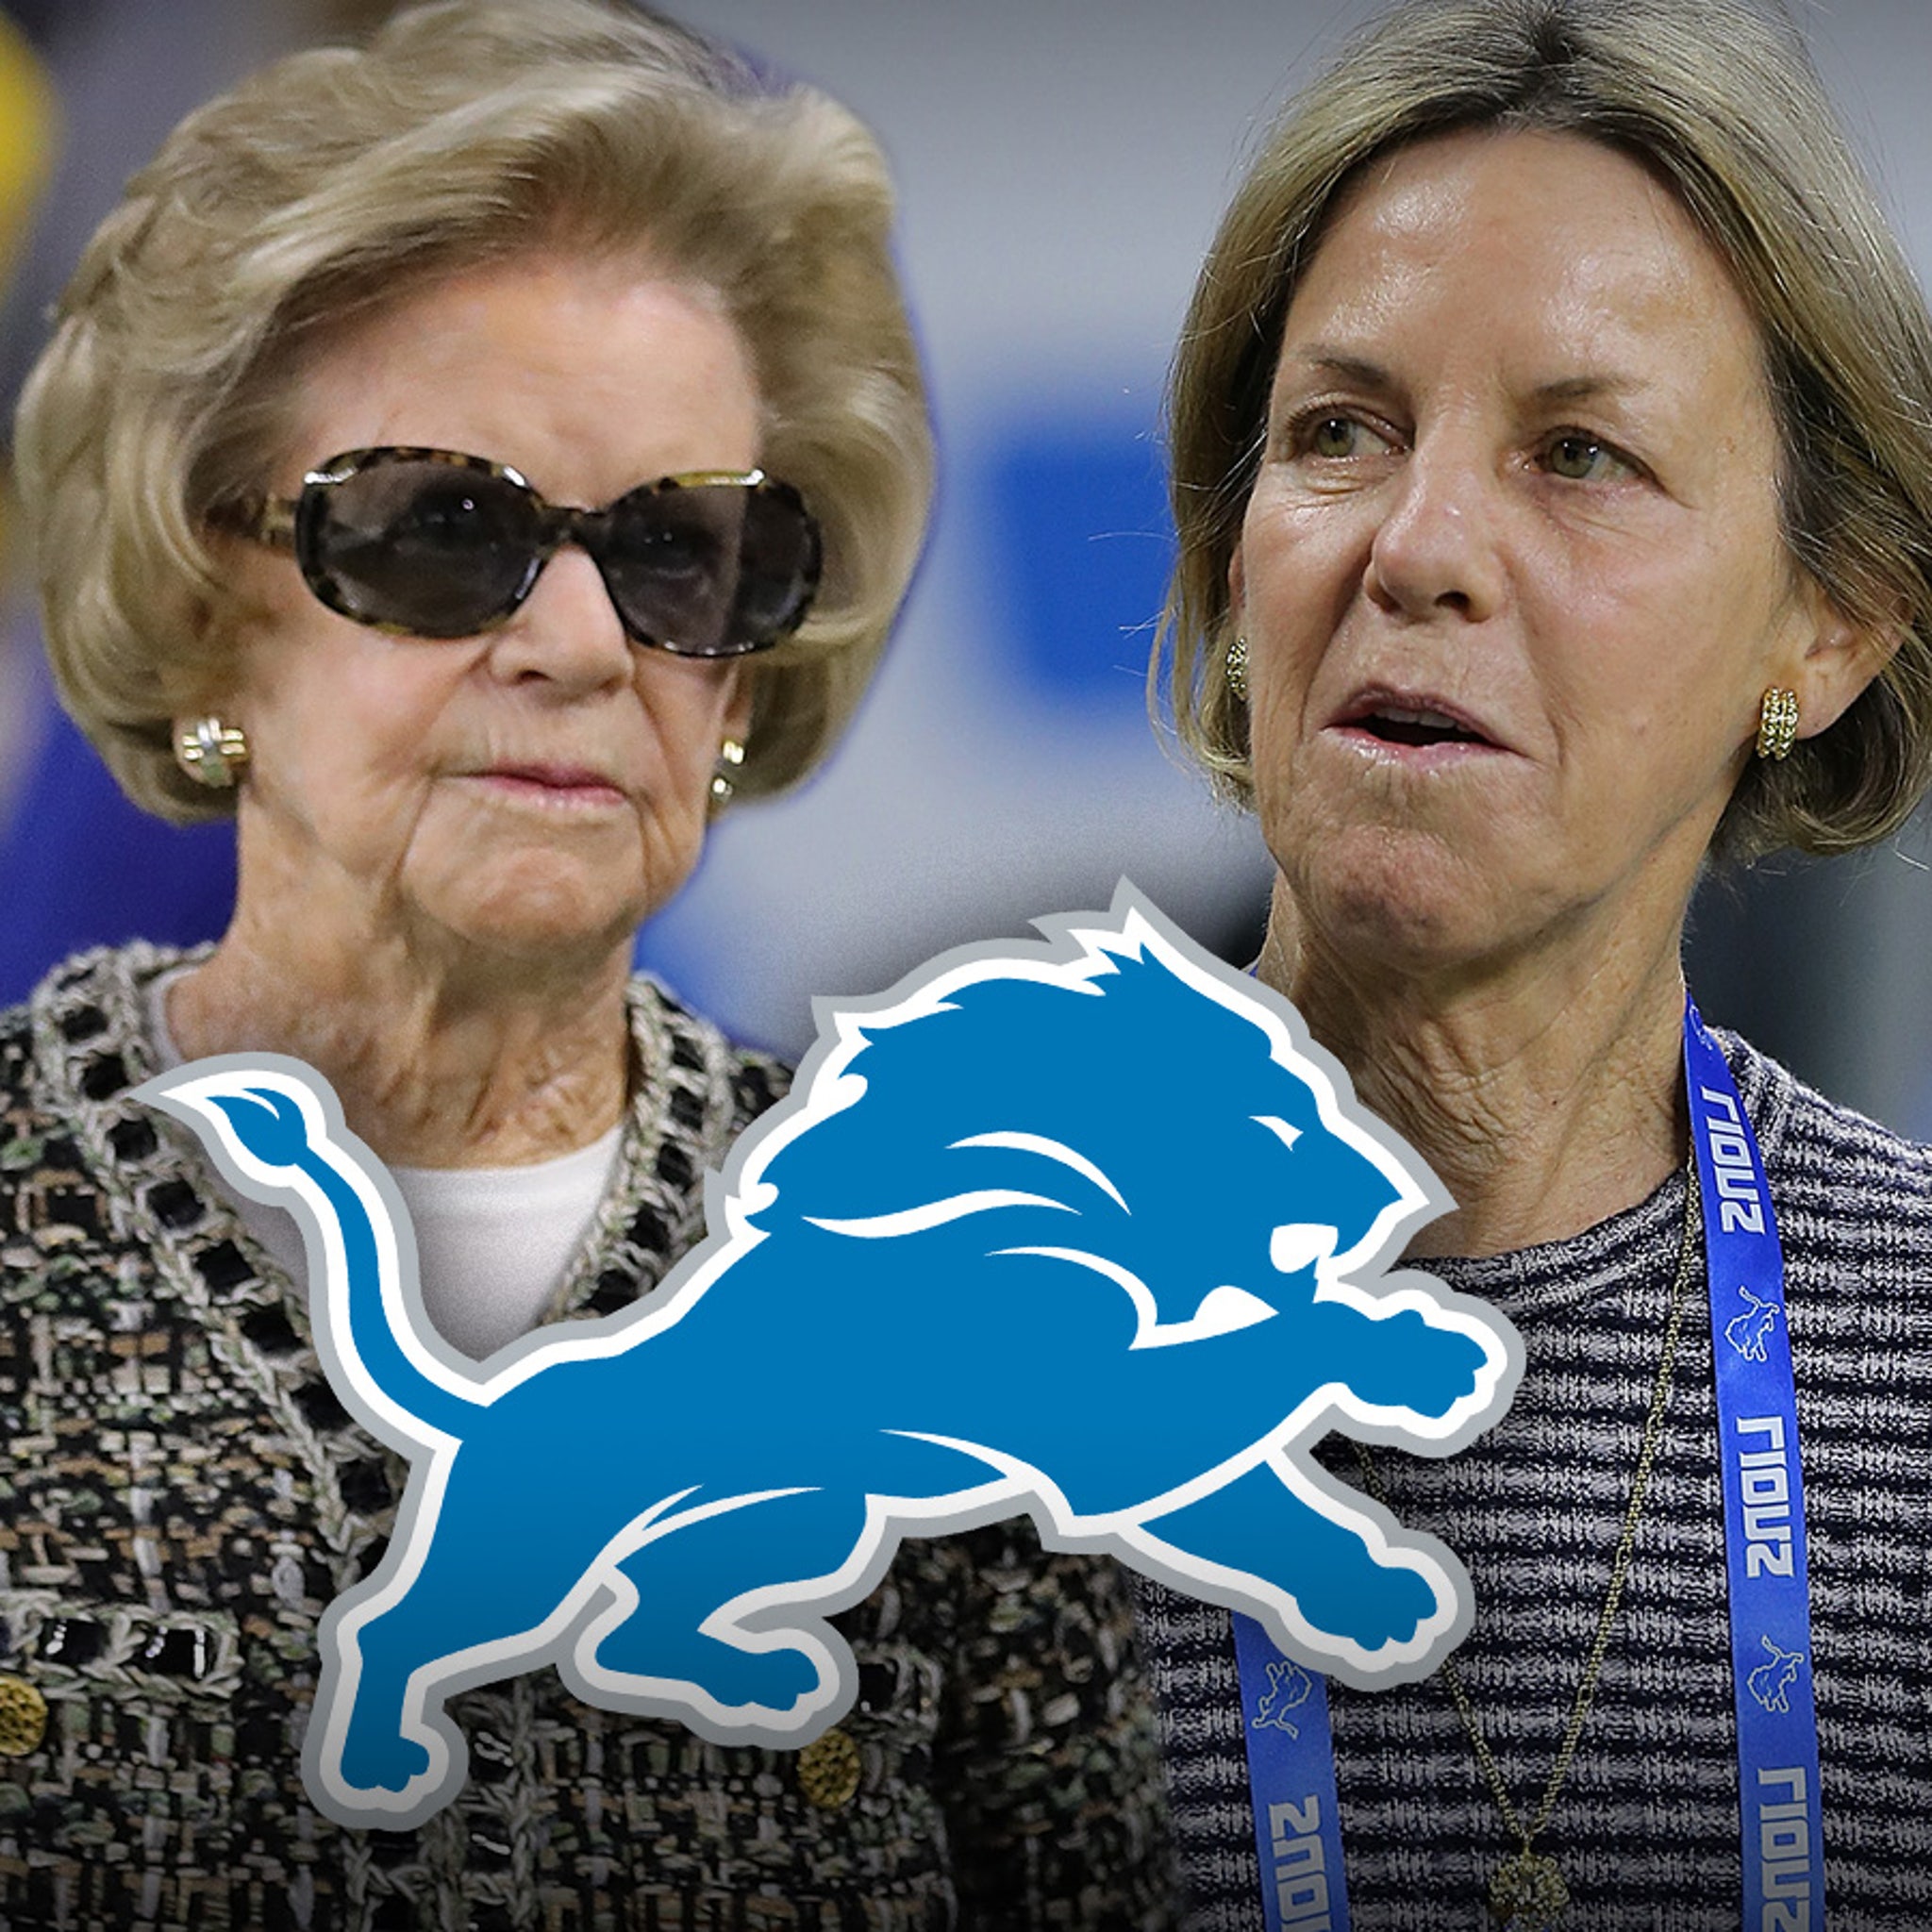 Sell The Team' Detroit Lions shirts with Martha Ford flood internet